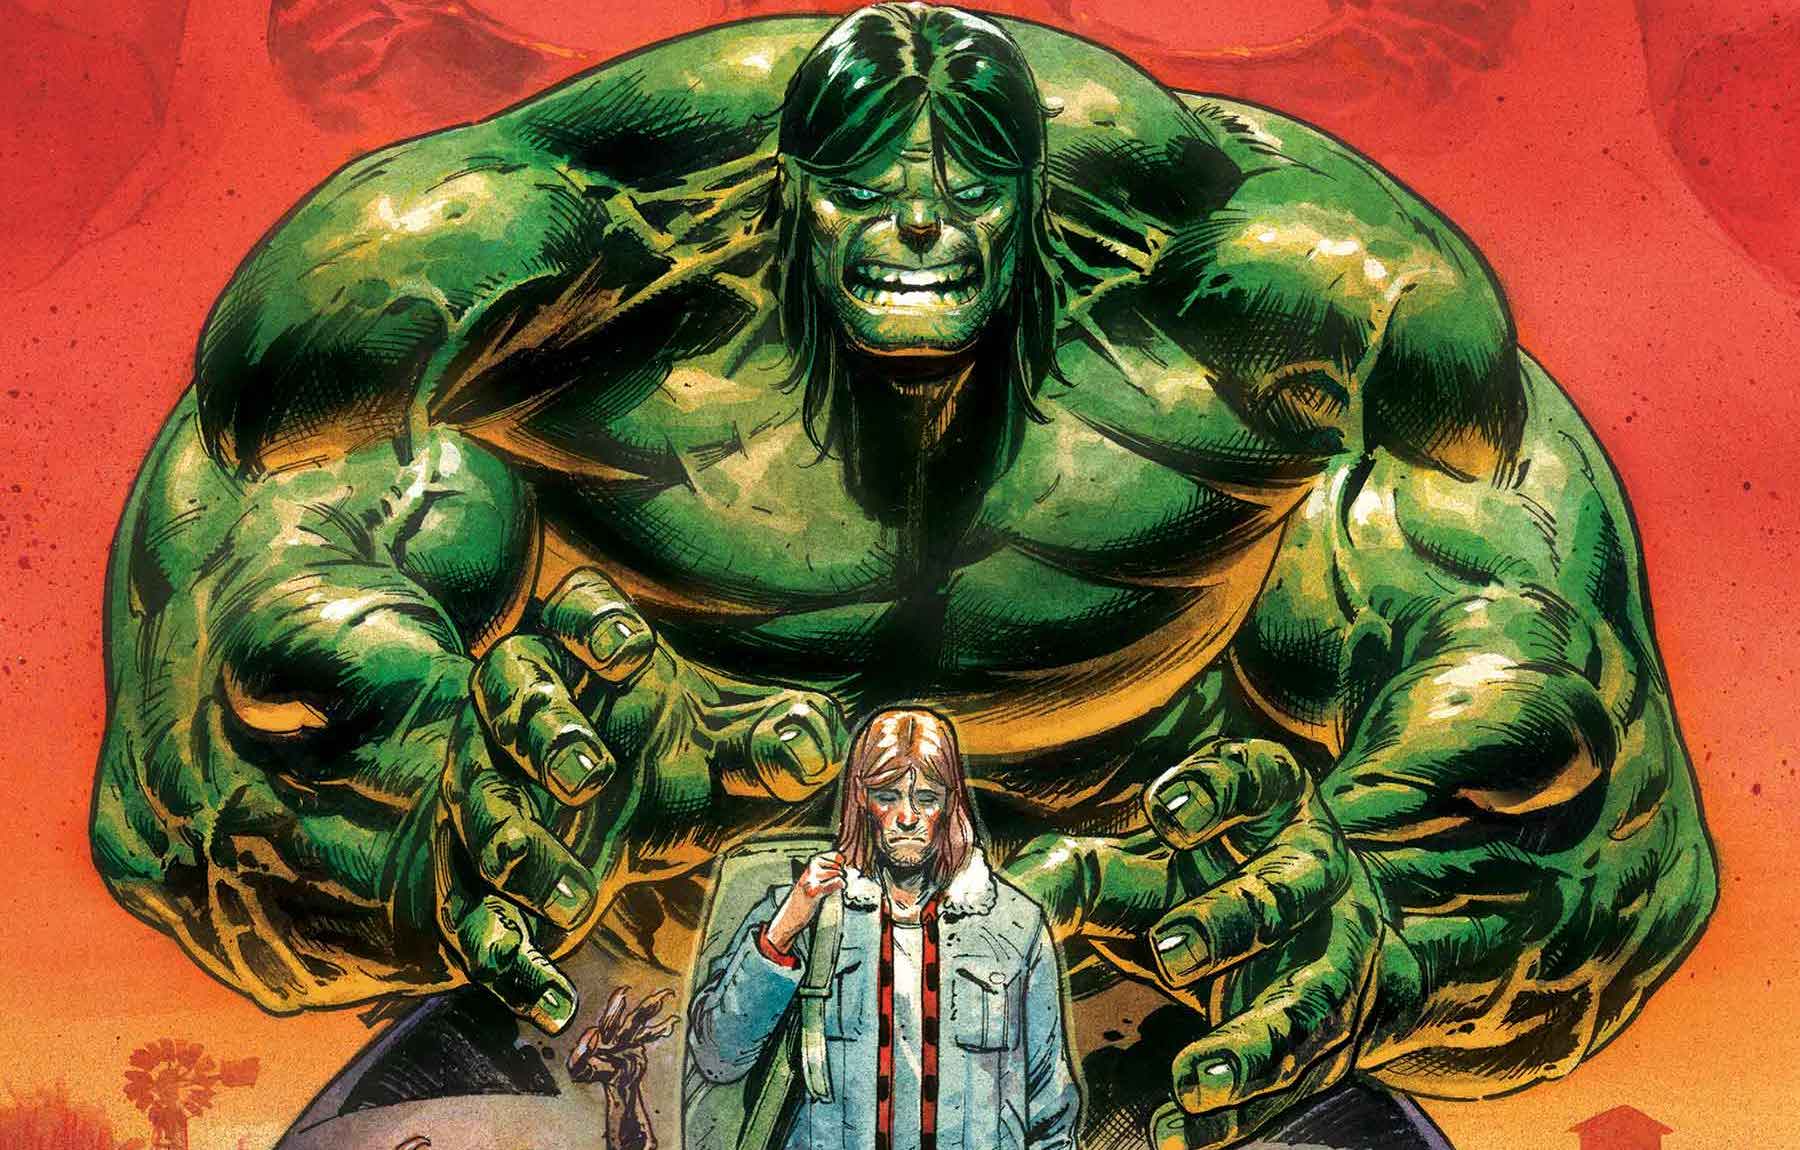 'The Incredible Hulk' #1 will satisfy horror fans